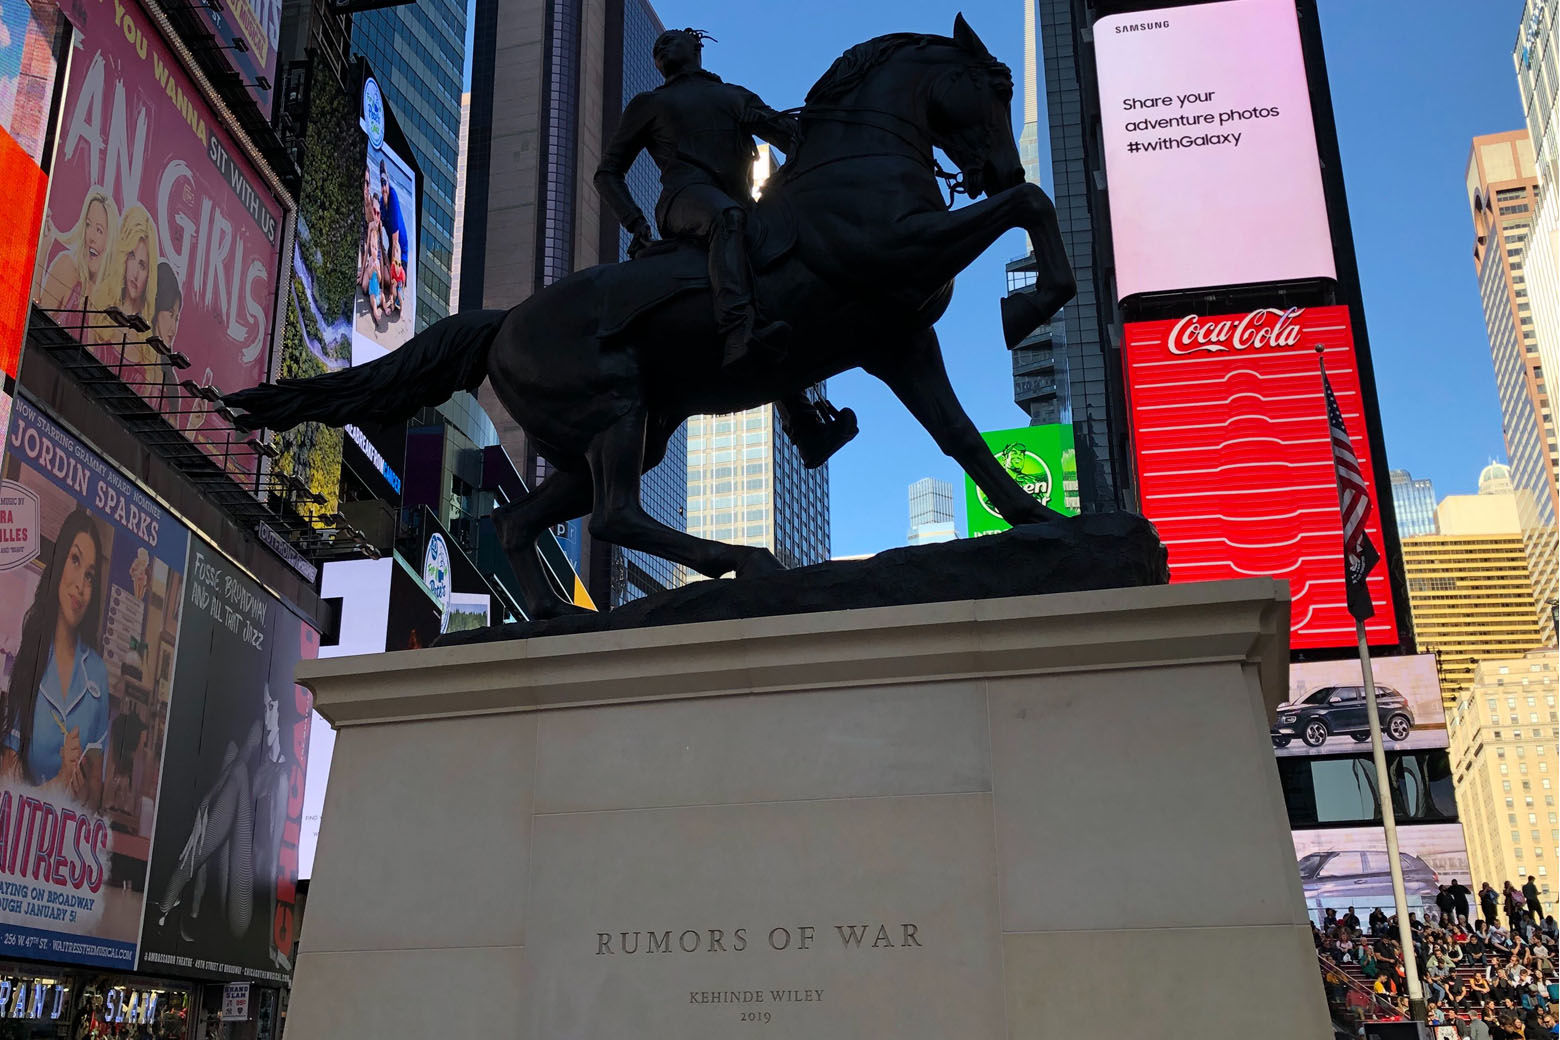 Kehinde Wiley’s “Rumors of War," which was previously located in New York City's Times Square, will be permanently installed Dec. 10 at the Virginia Museum of Fine Arts.